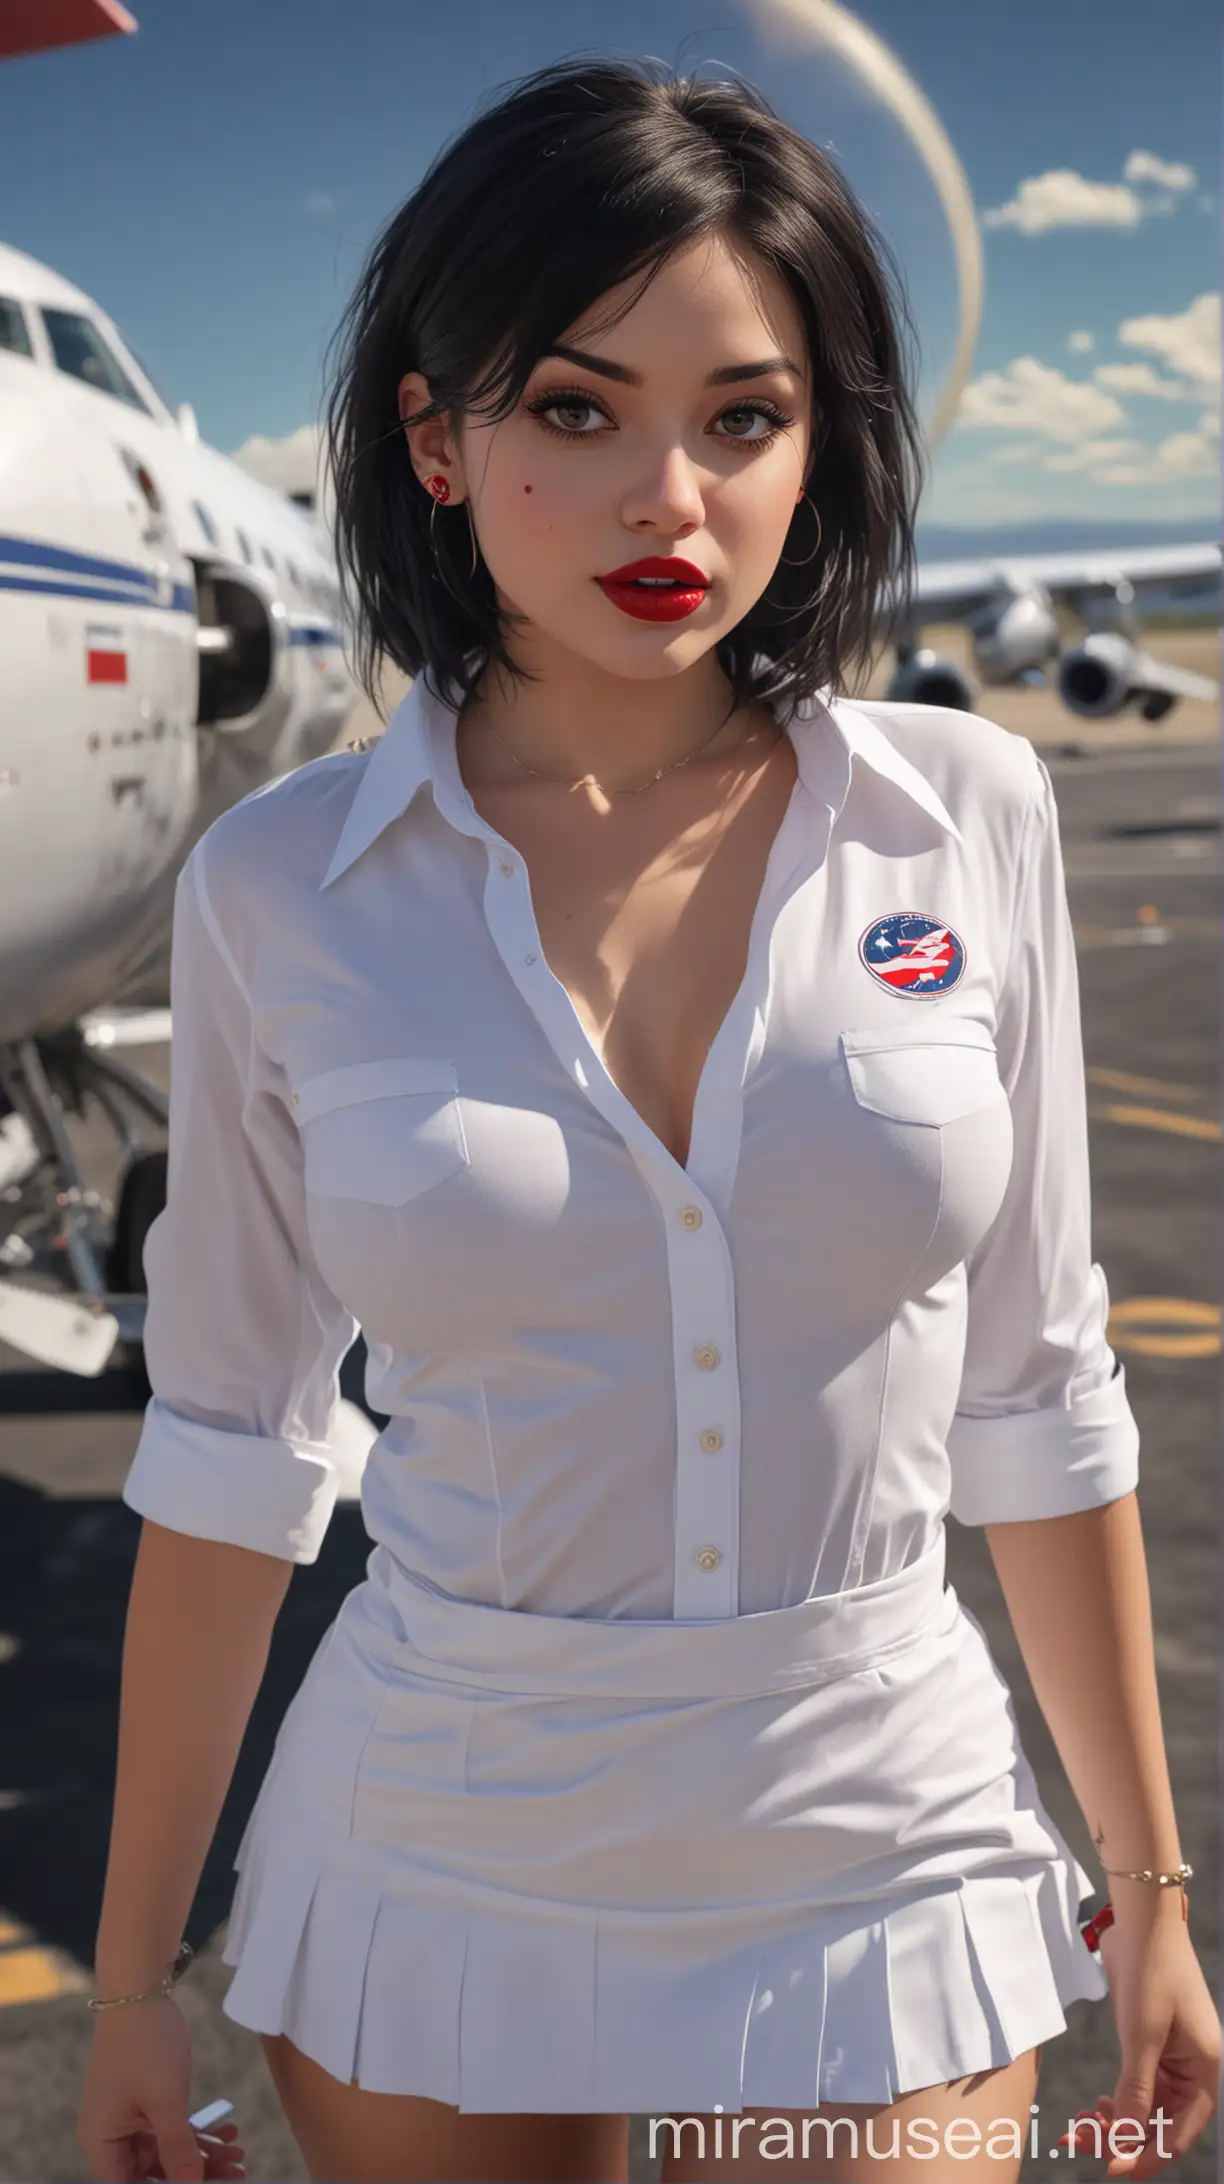 Fashionable Woman with Black Hair and Red Lipstick on USA Airplane Runway